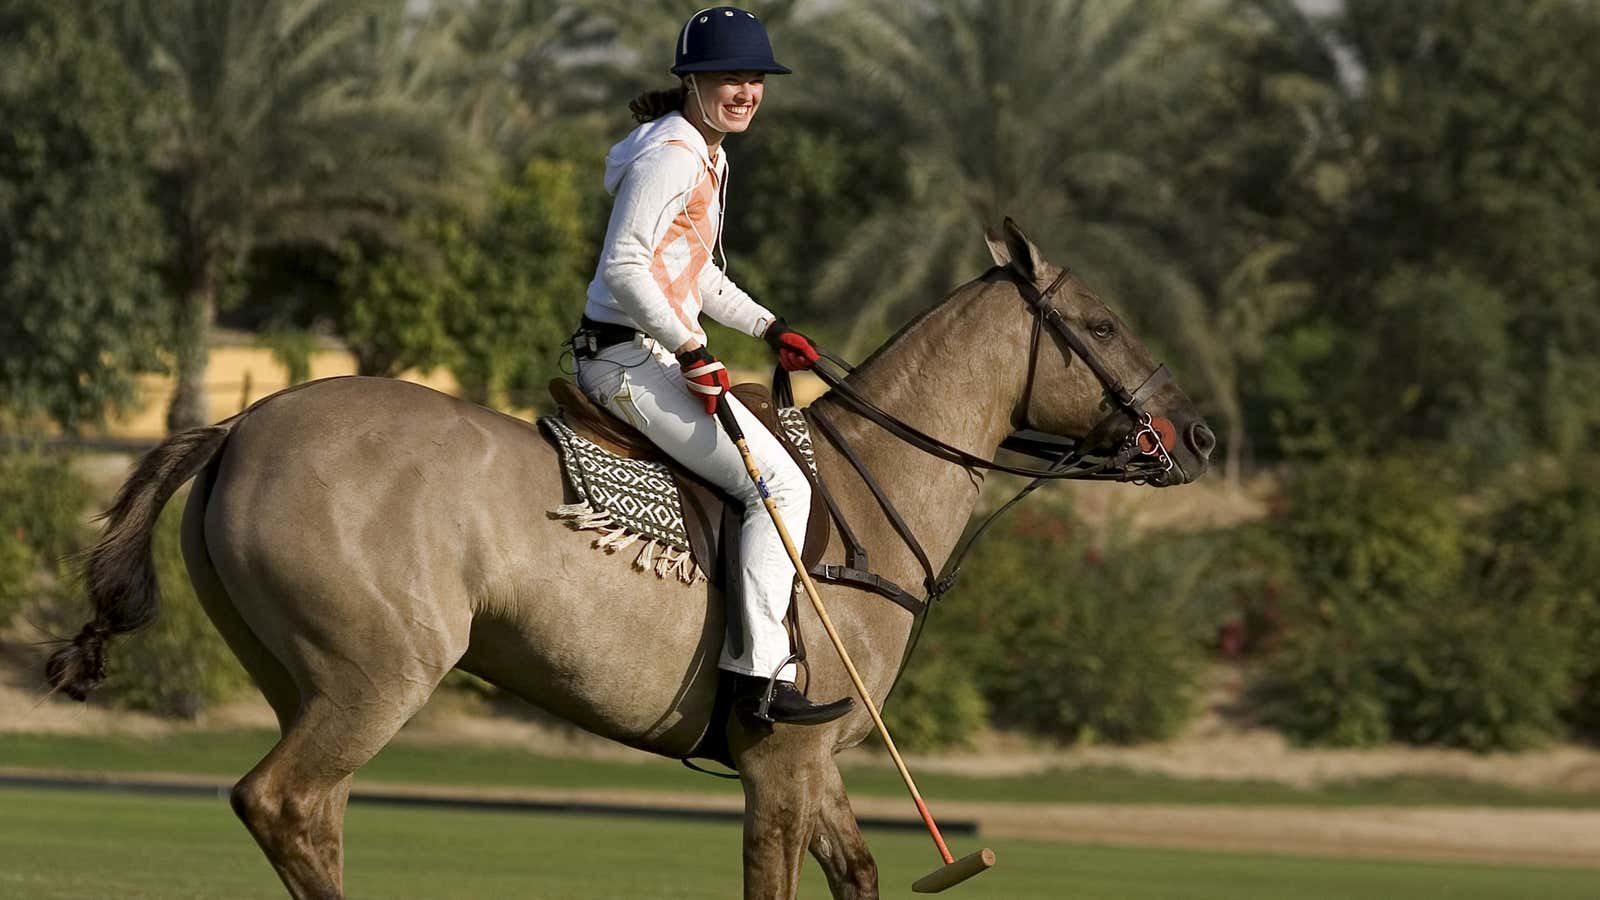 One more place to take polo lessons on artificial turf in the desert.